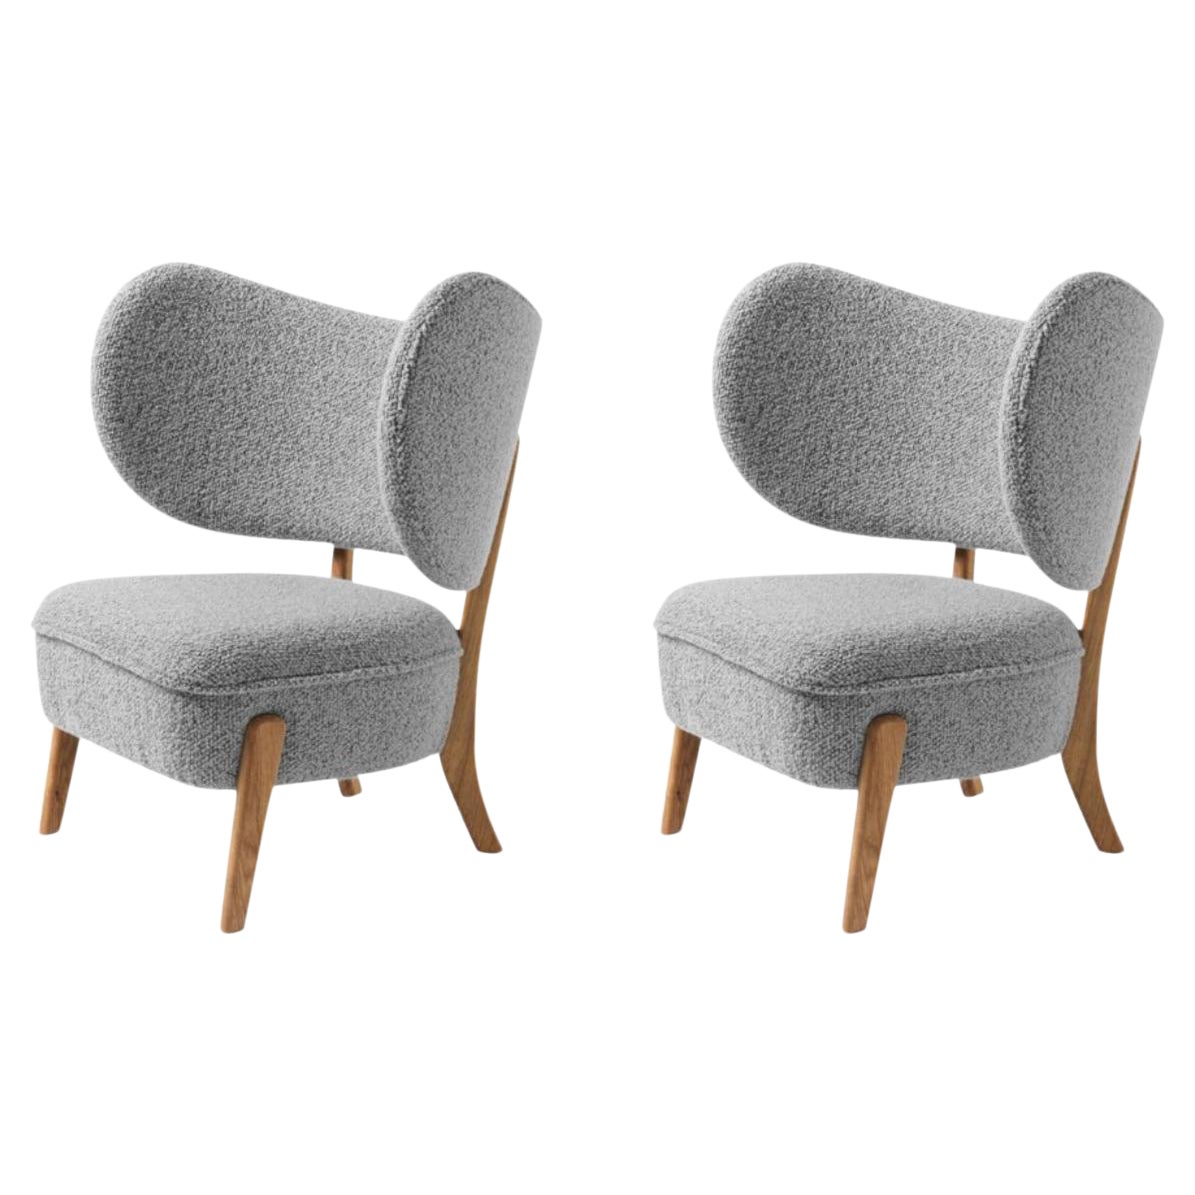 Set of 2 BUTE/Storr TMBO Lounge Chairs by Mazo Design For Sale